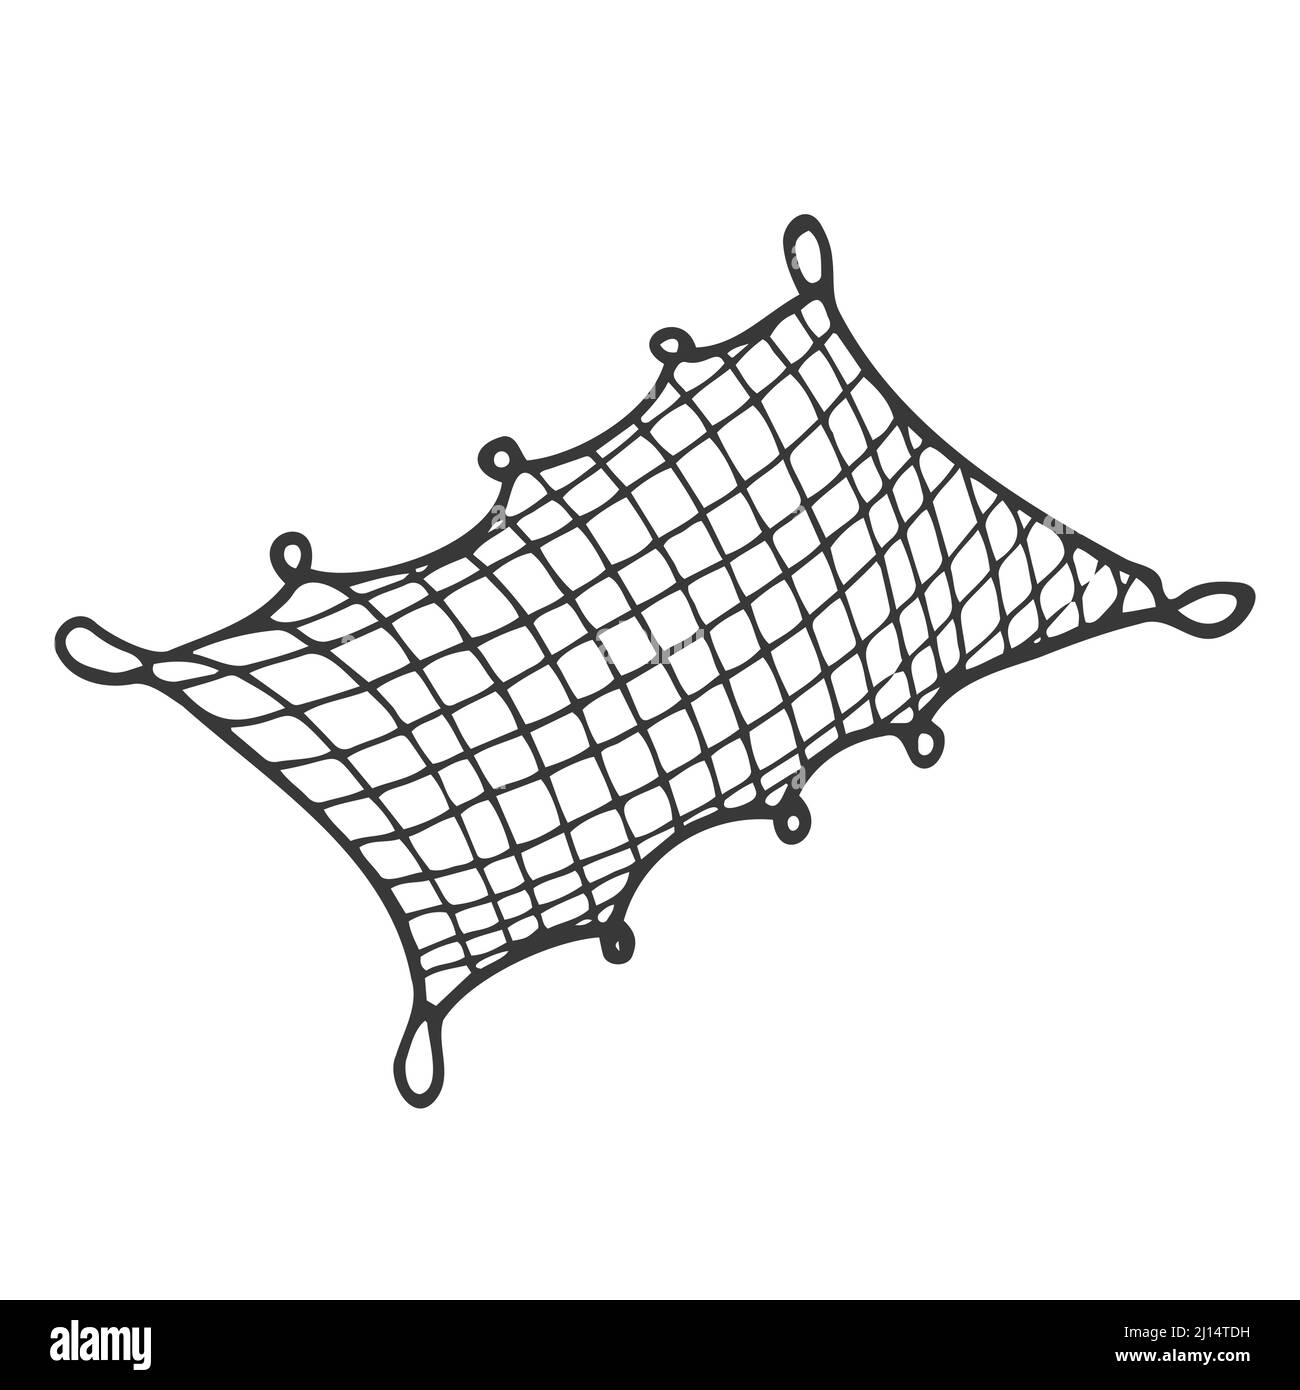 Doodle Fish net vector, hand drawn fishing concept. Isolated